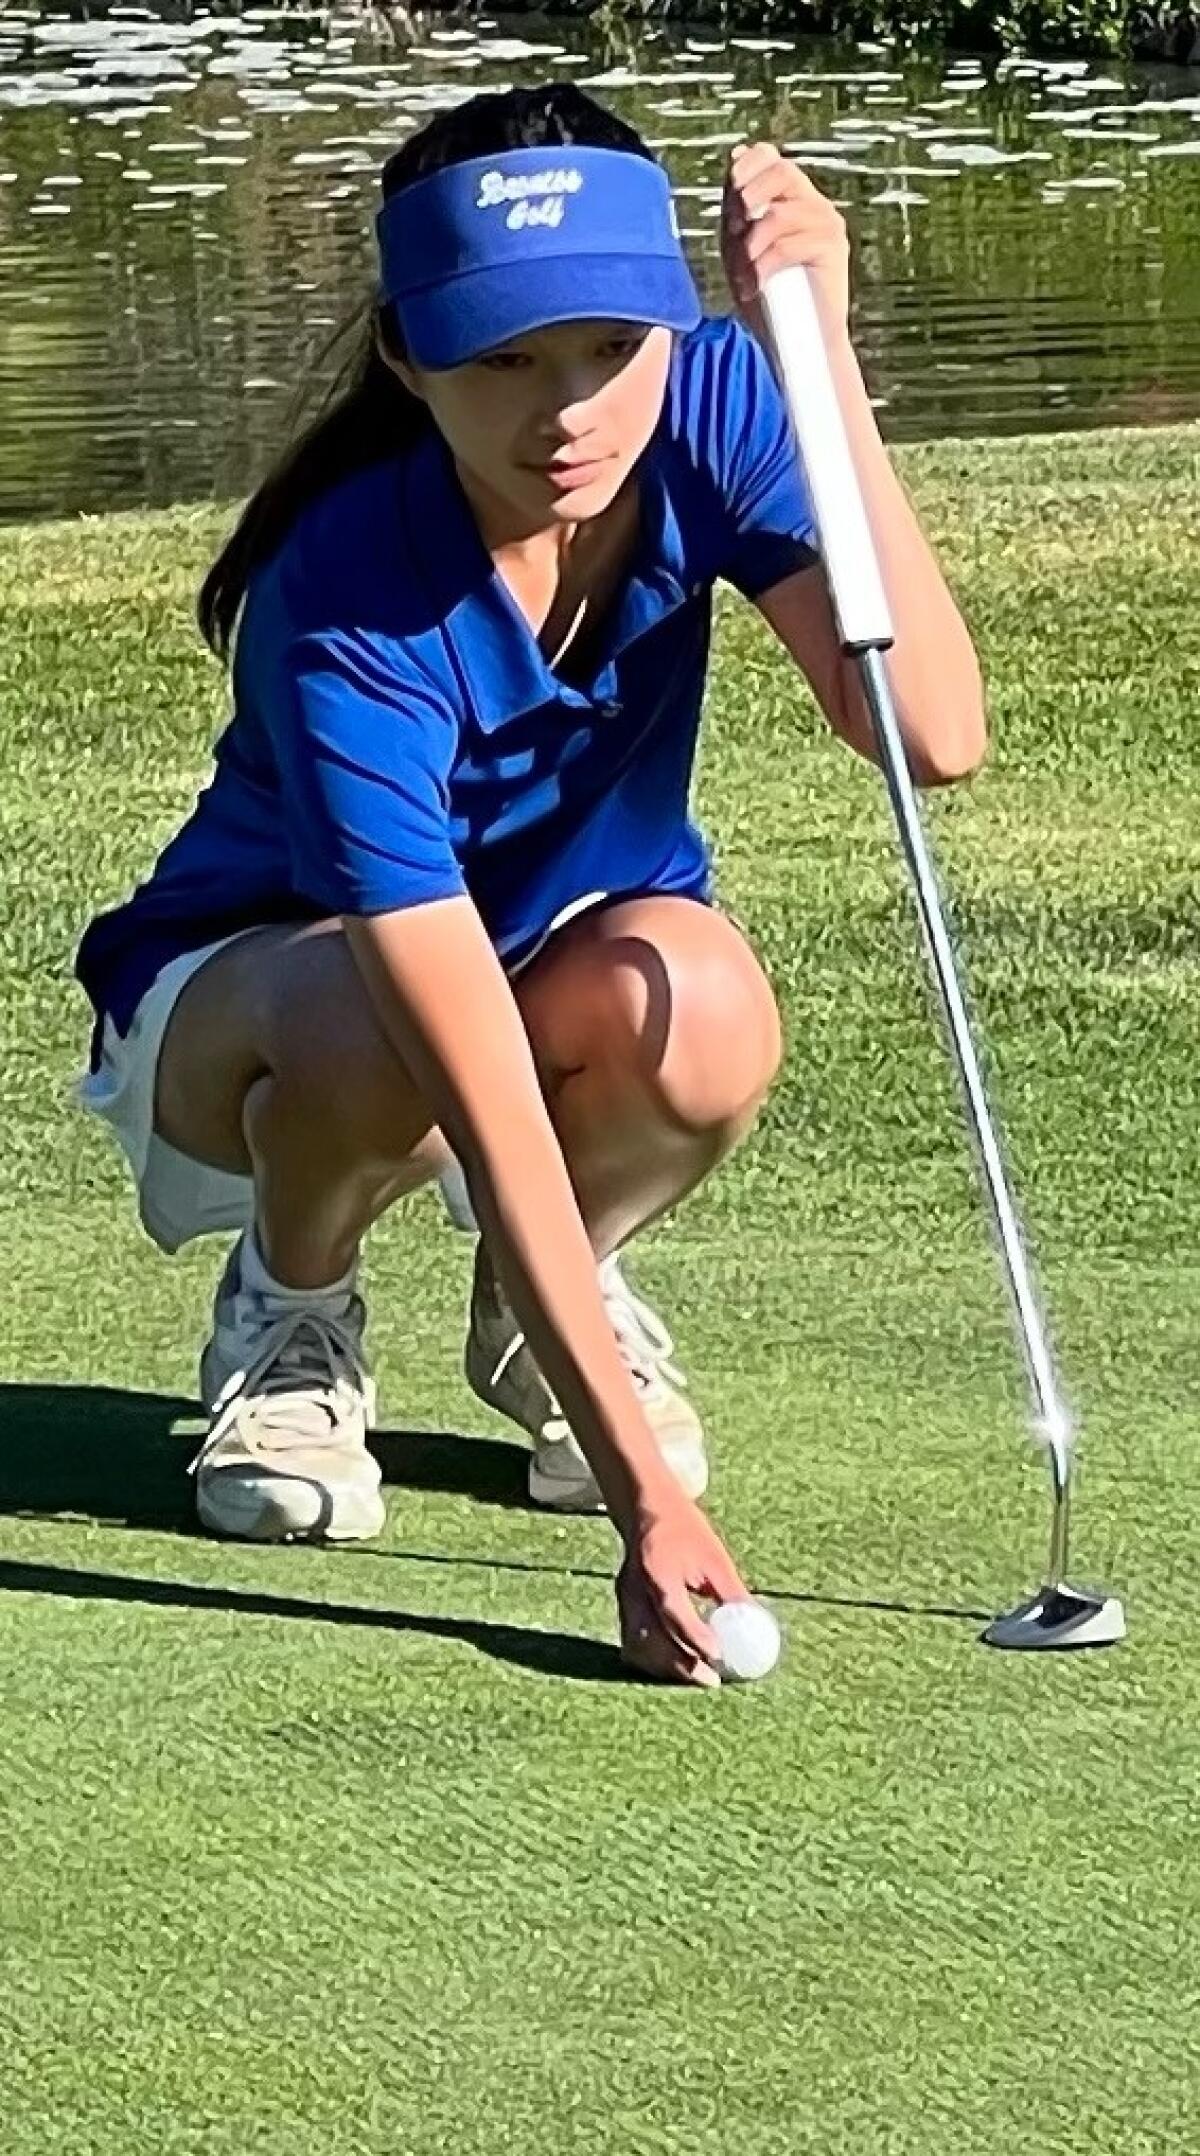 Kayla Geng, 16, a golfer with the Rancho Bernardo High team, is known for her strong short game and deadly putting.